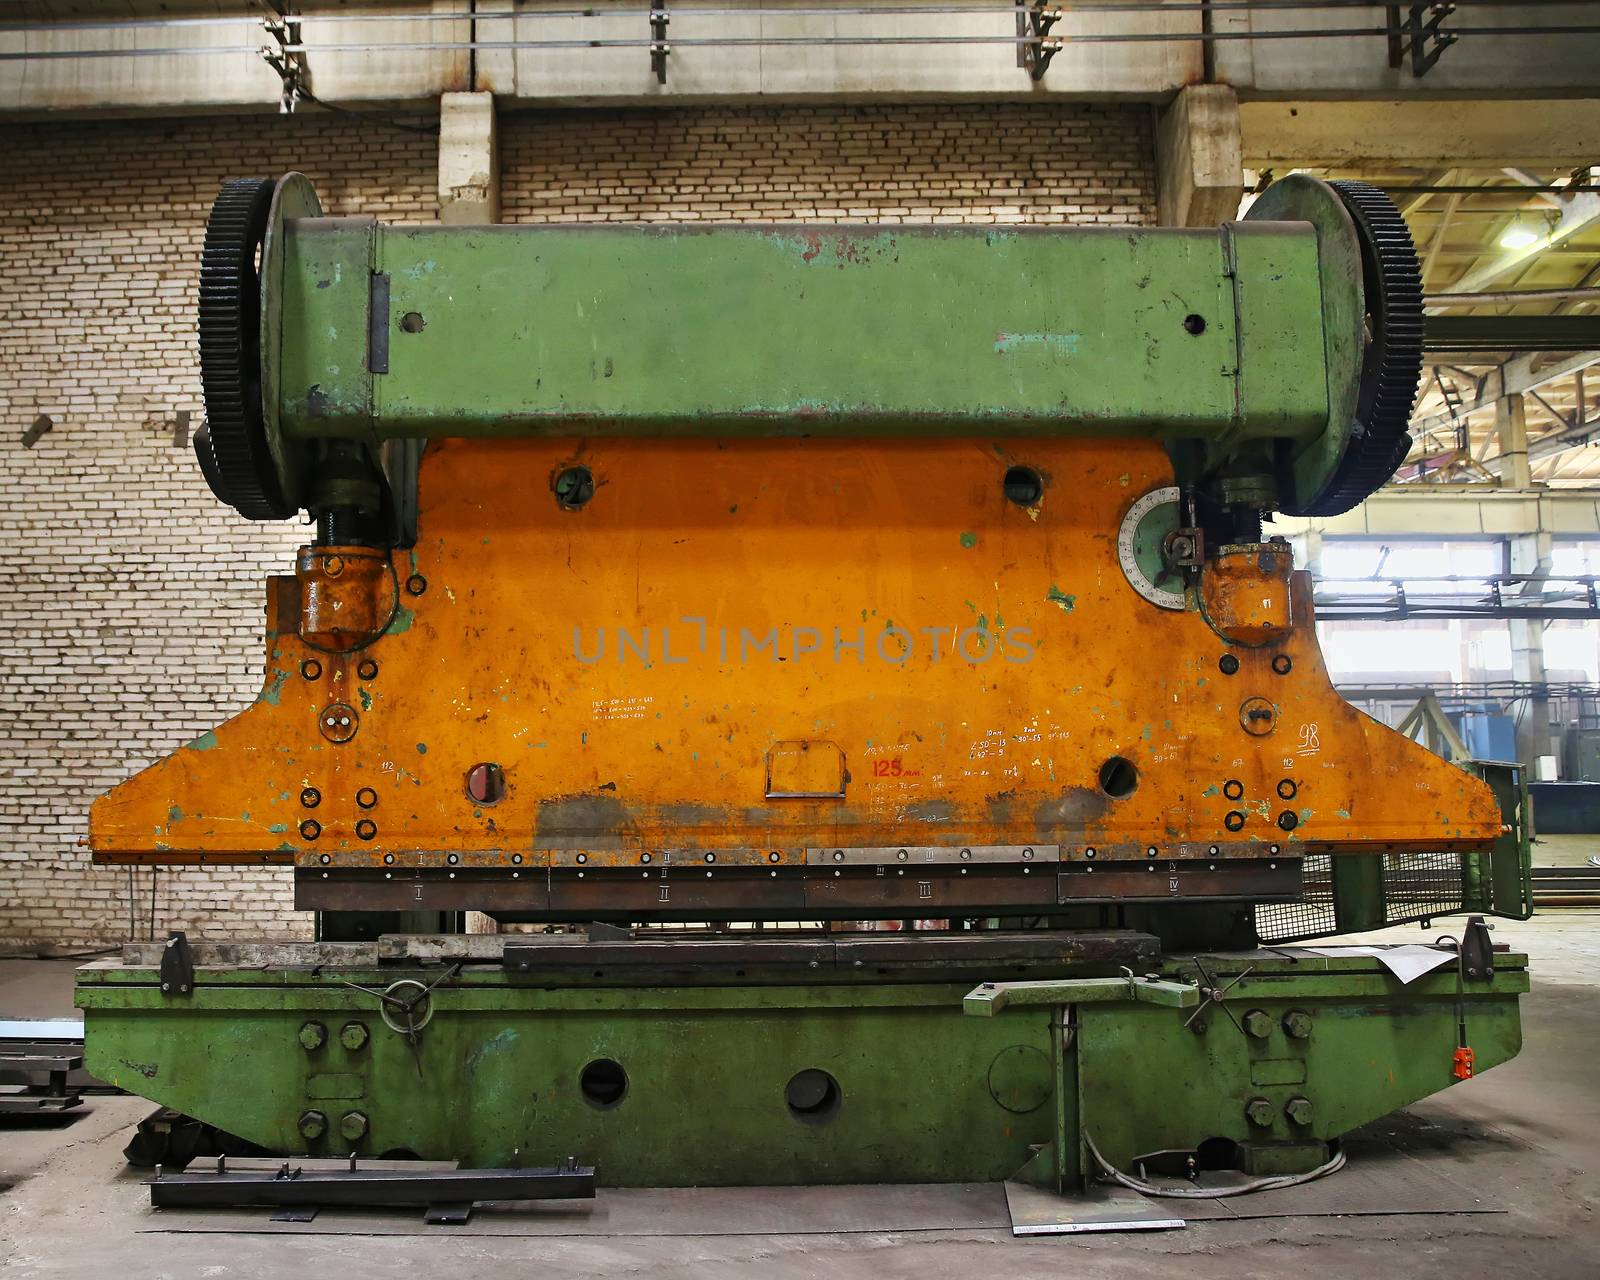 Old industrial press for bending steel sheets by sergasx